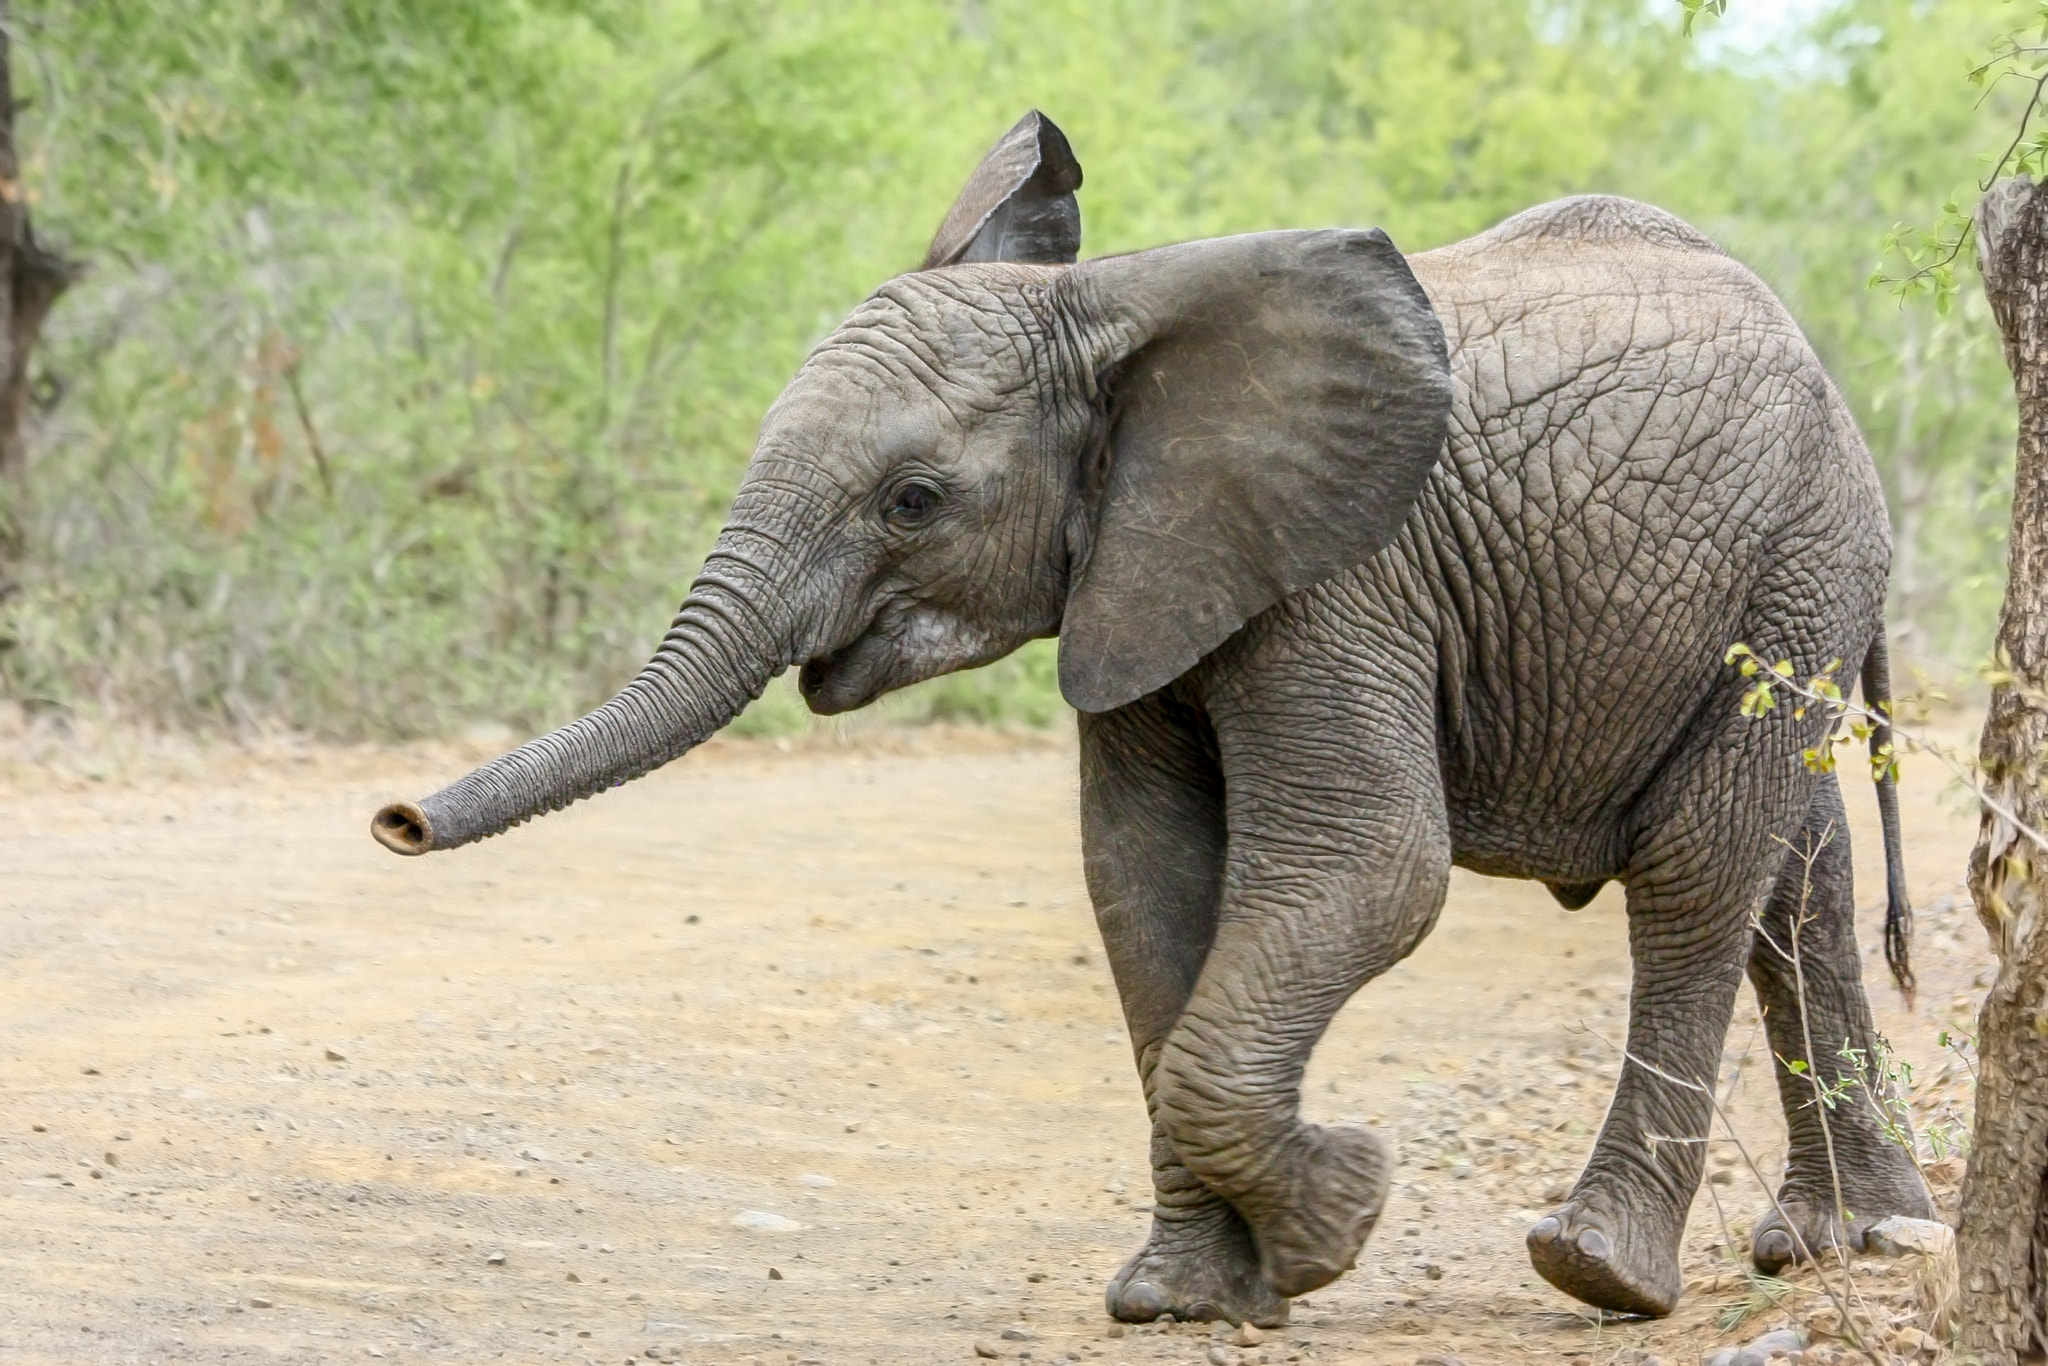 A young baby elephant boldly crosses the road waving his trumpet trunk